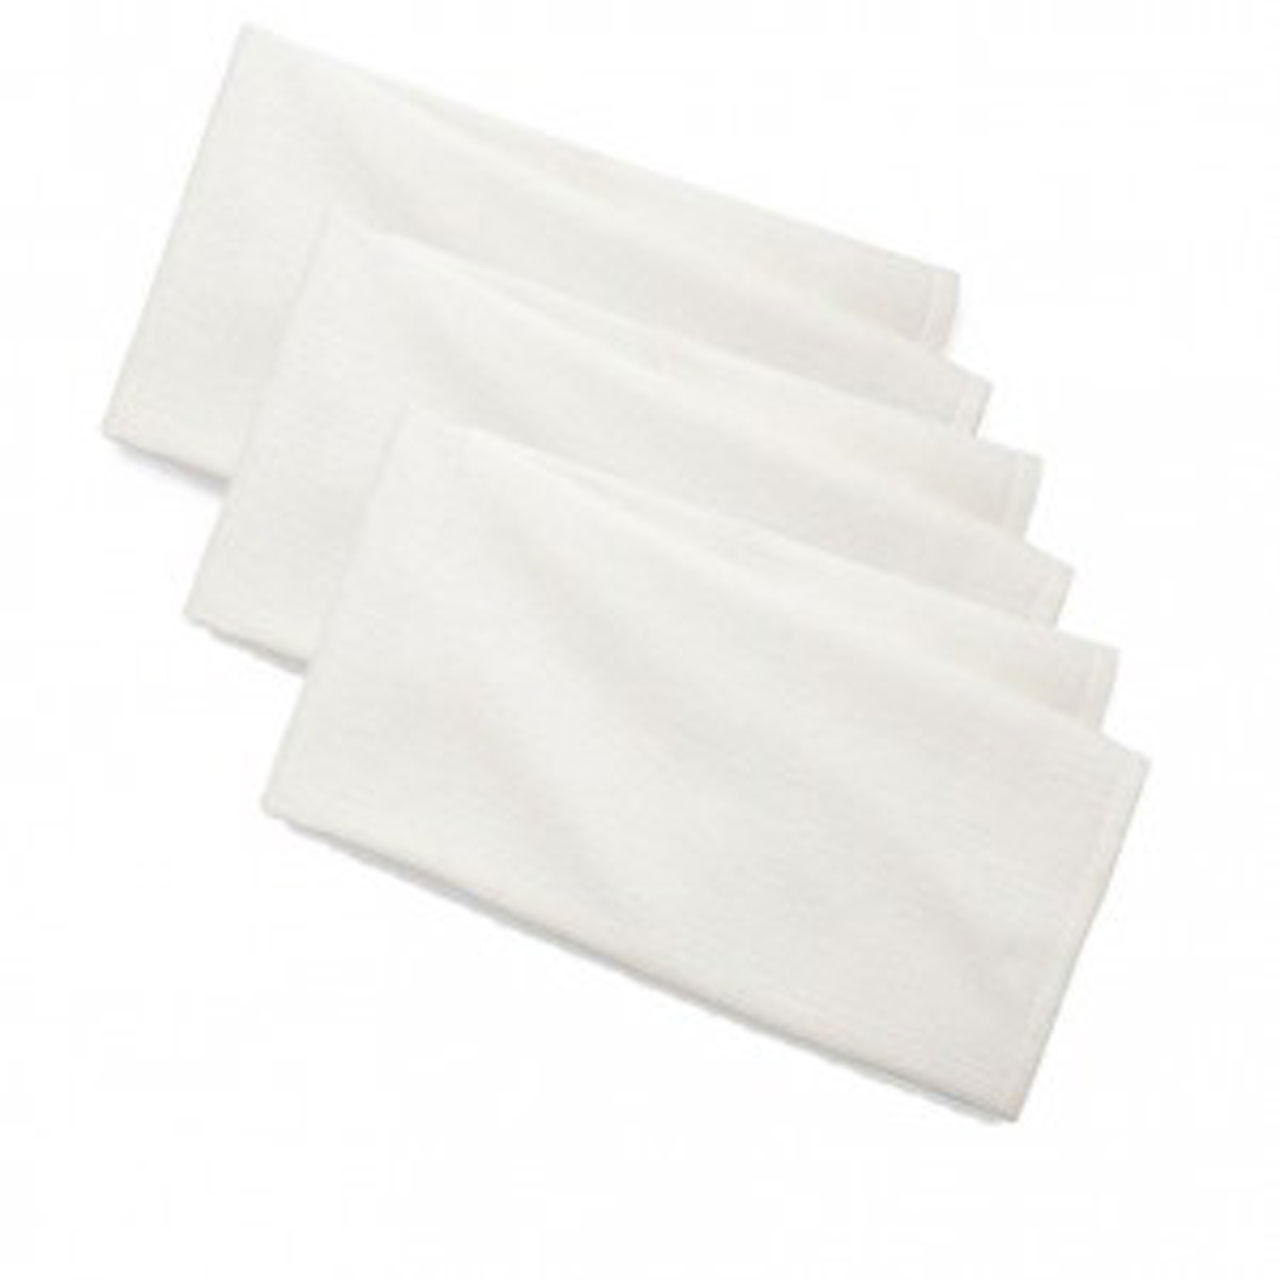 What are the key attributes of White Huck Towels?